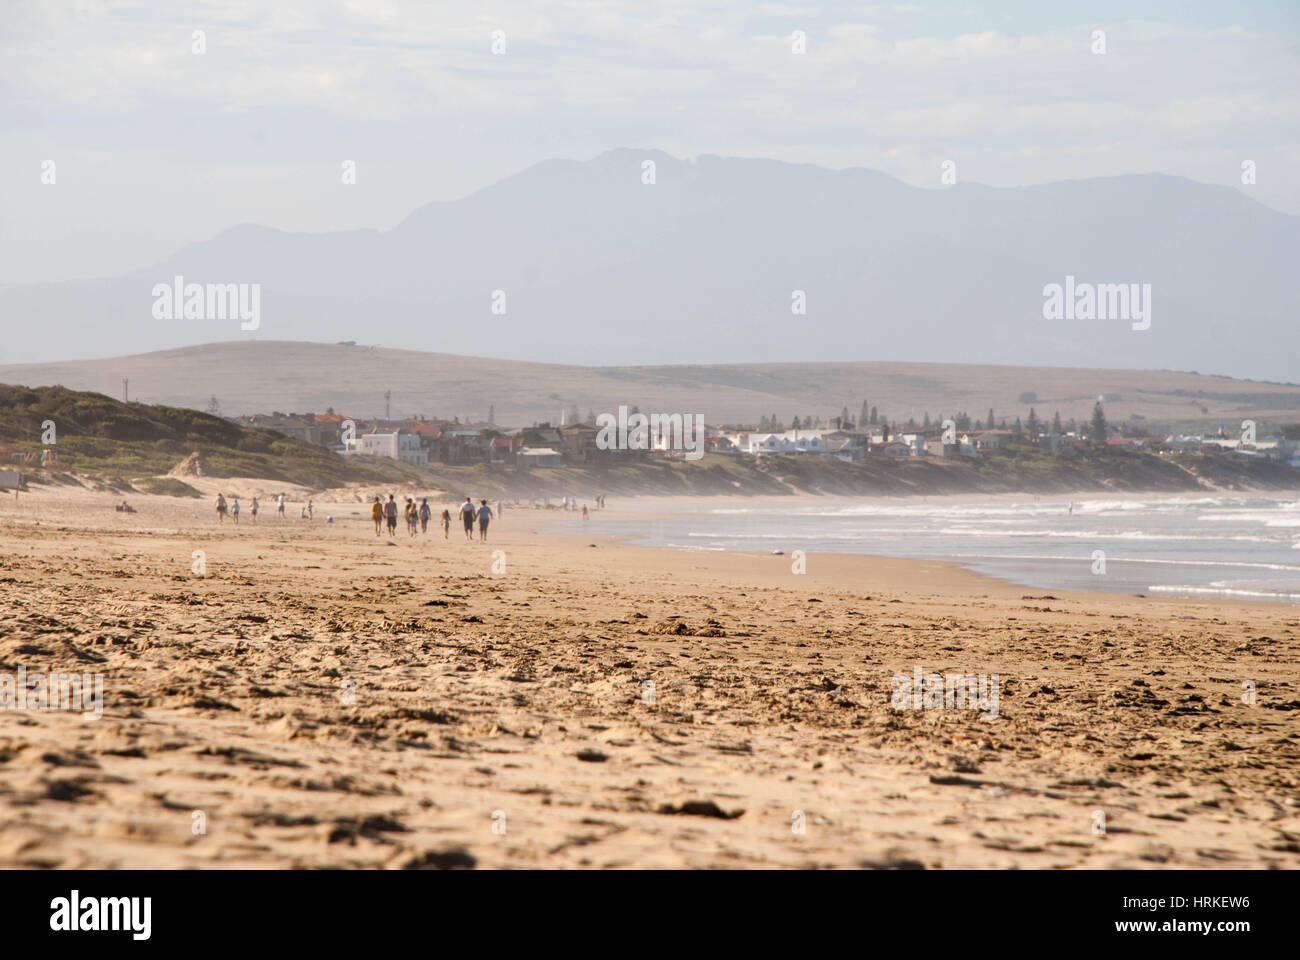 People walking along a beach in Mossel Bay, South Africa Stock Photo